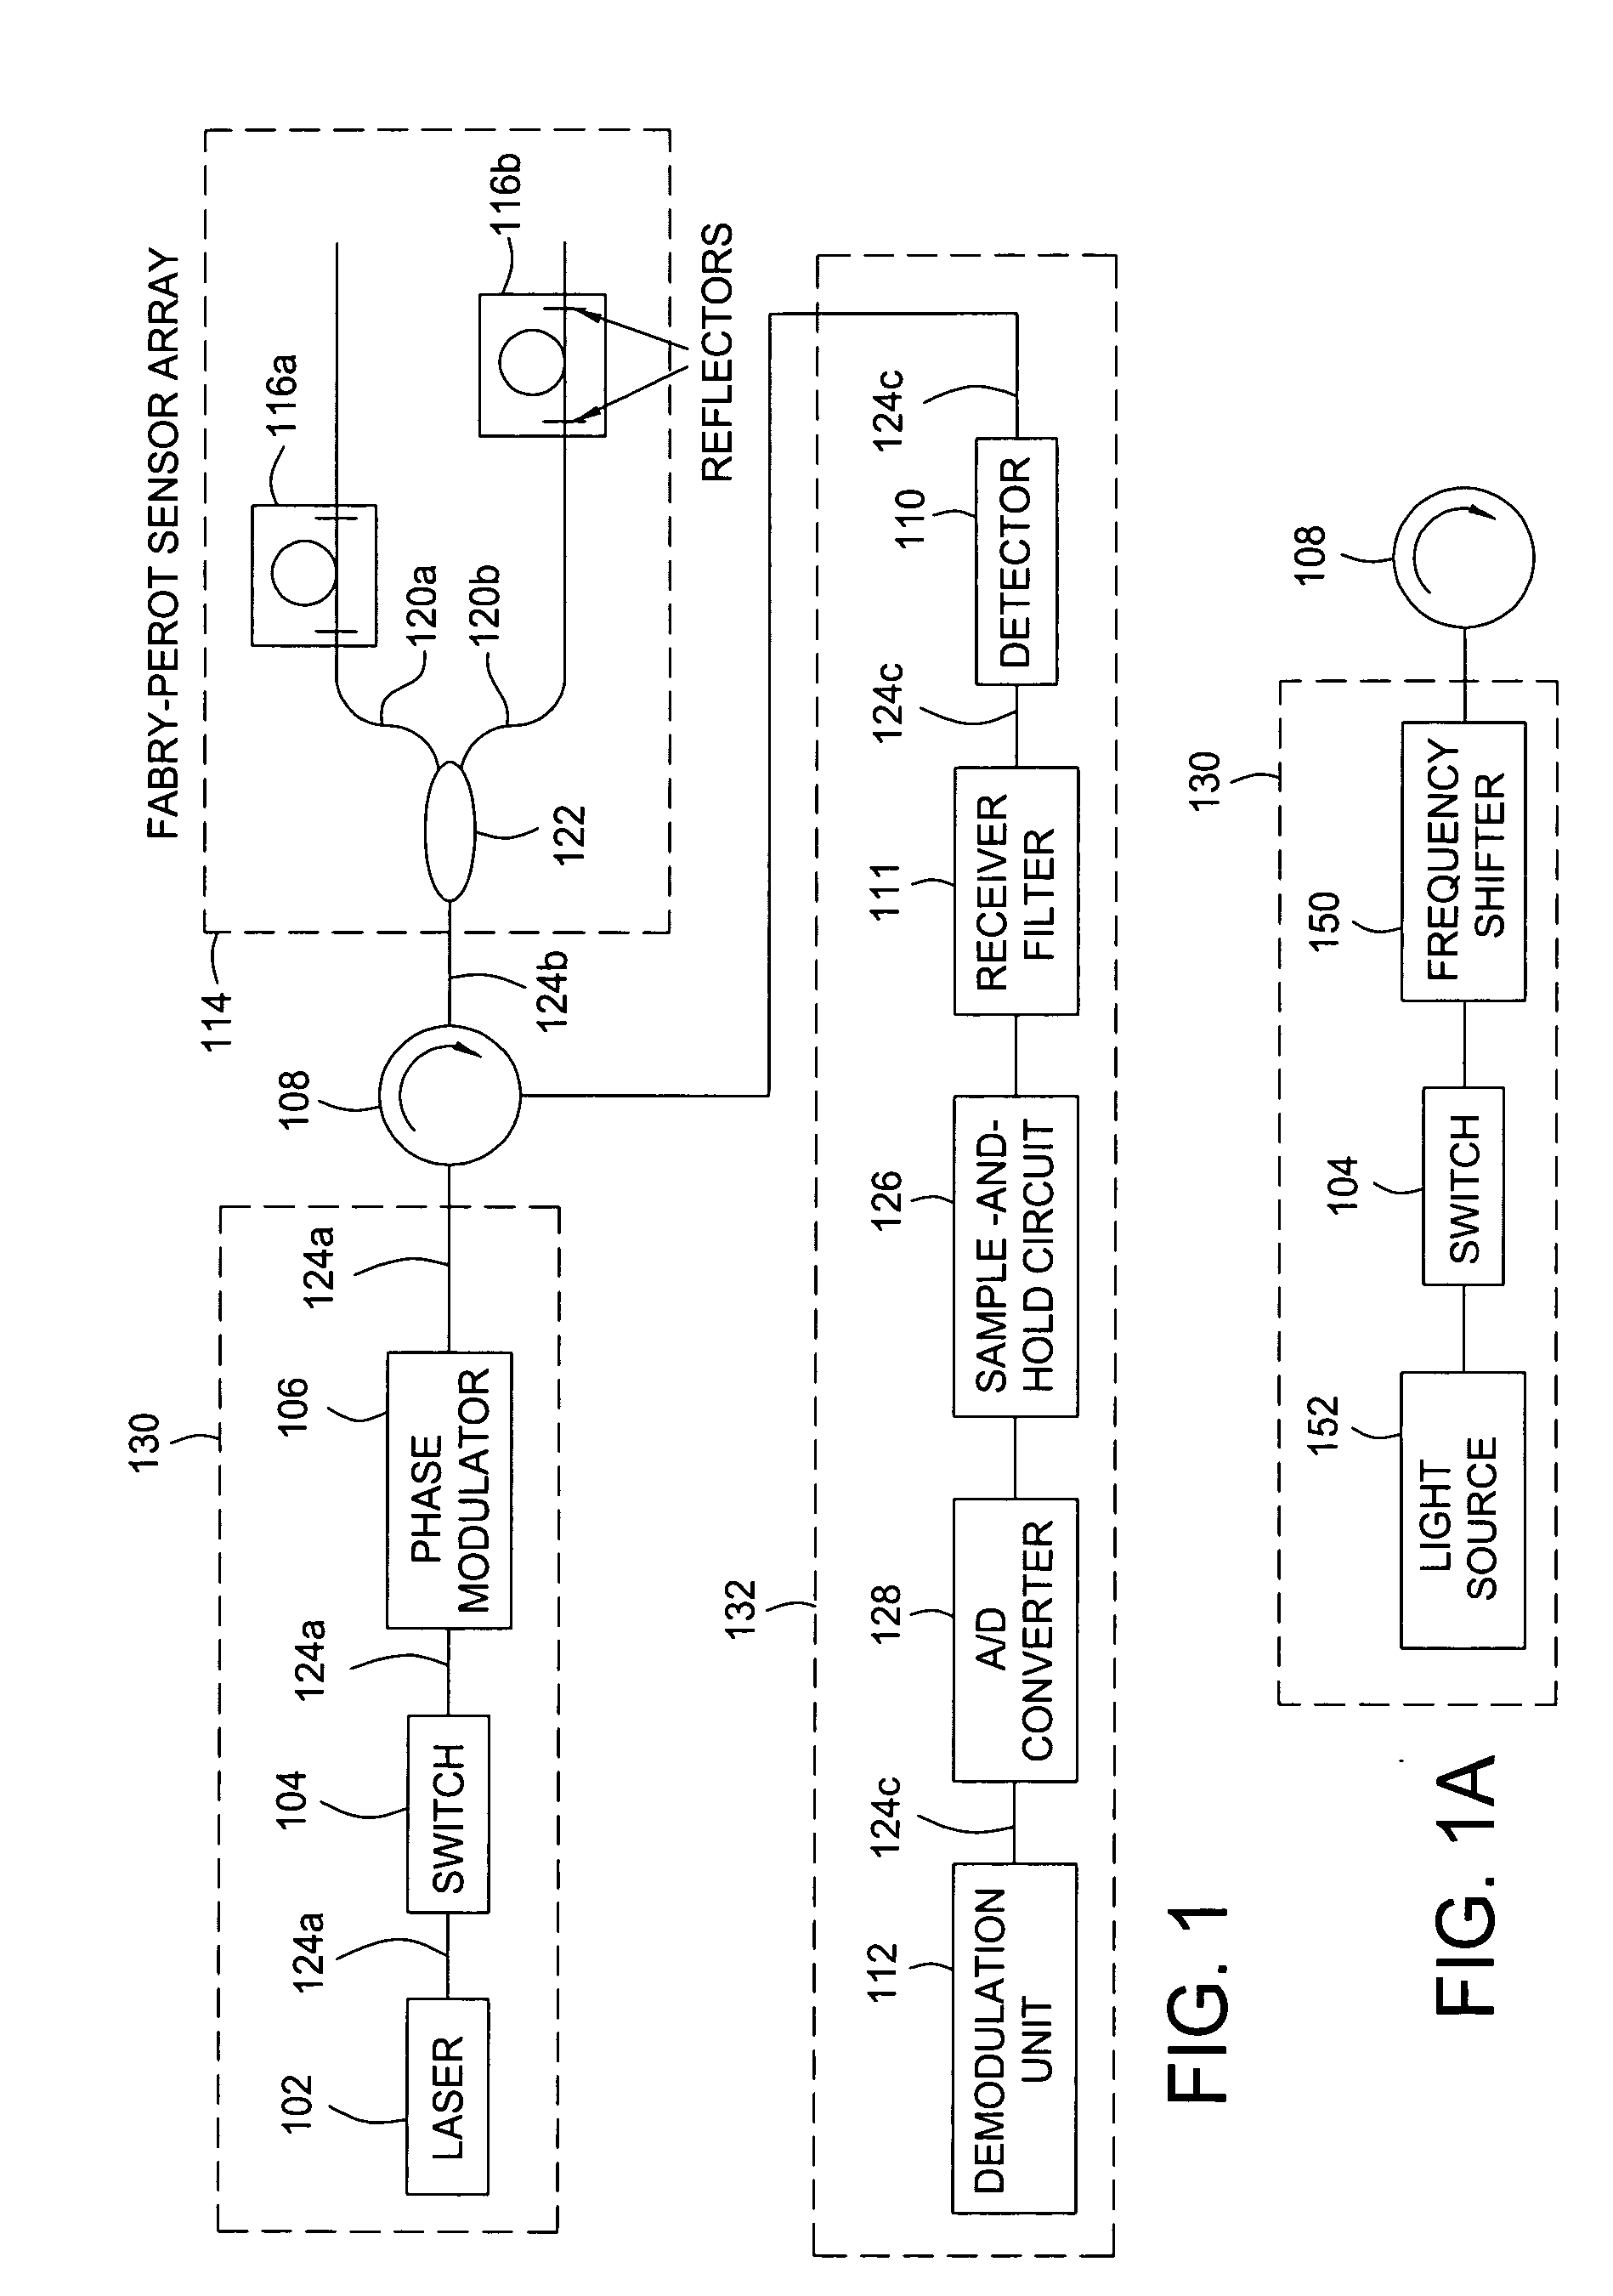 Method and apparatus for suppression of crosstalk and noise in time-division multiplexed interferometric sensor systems